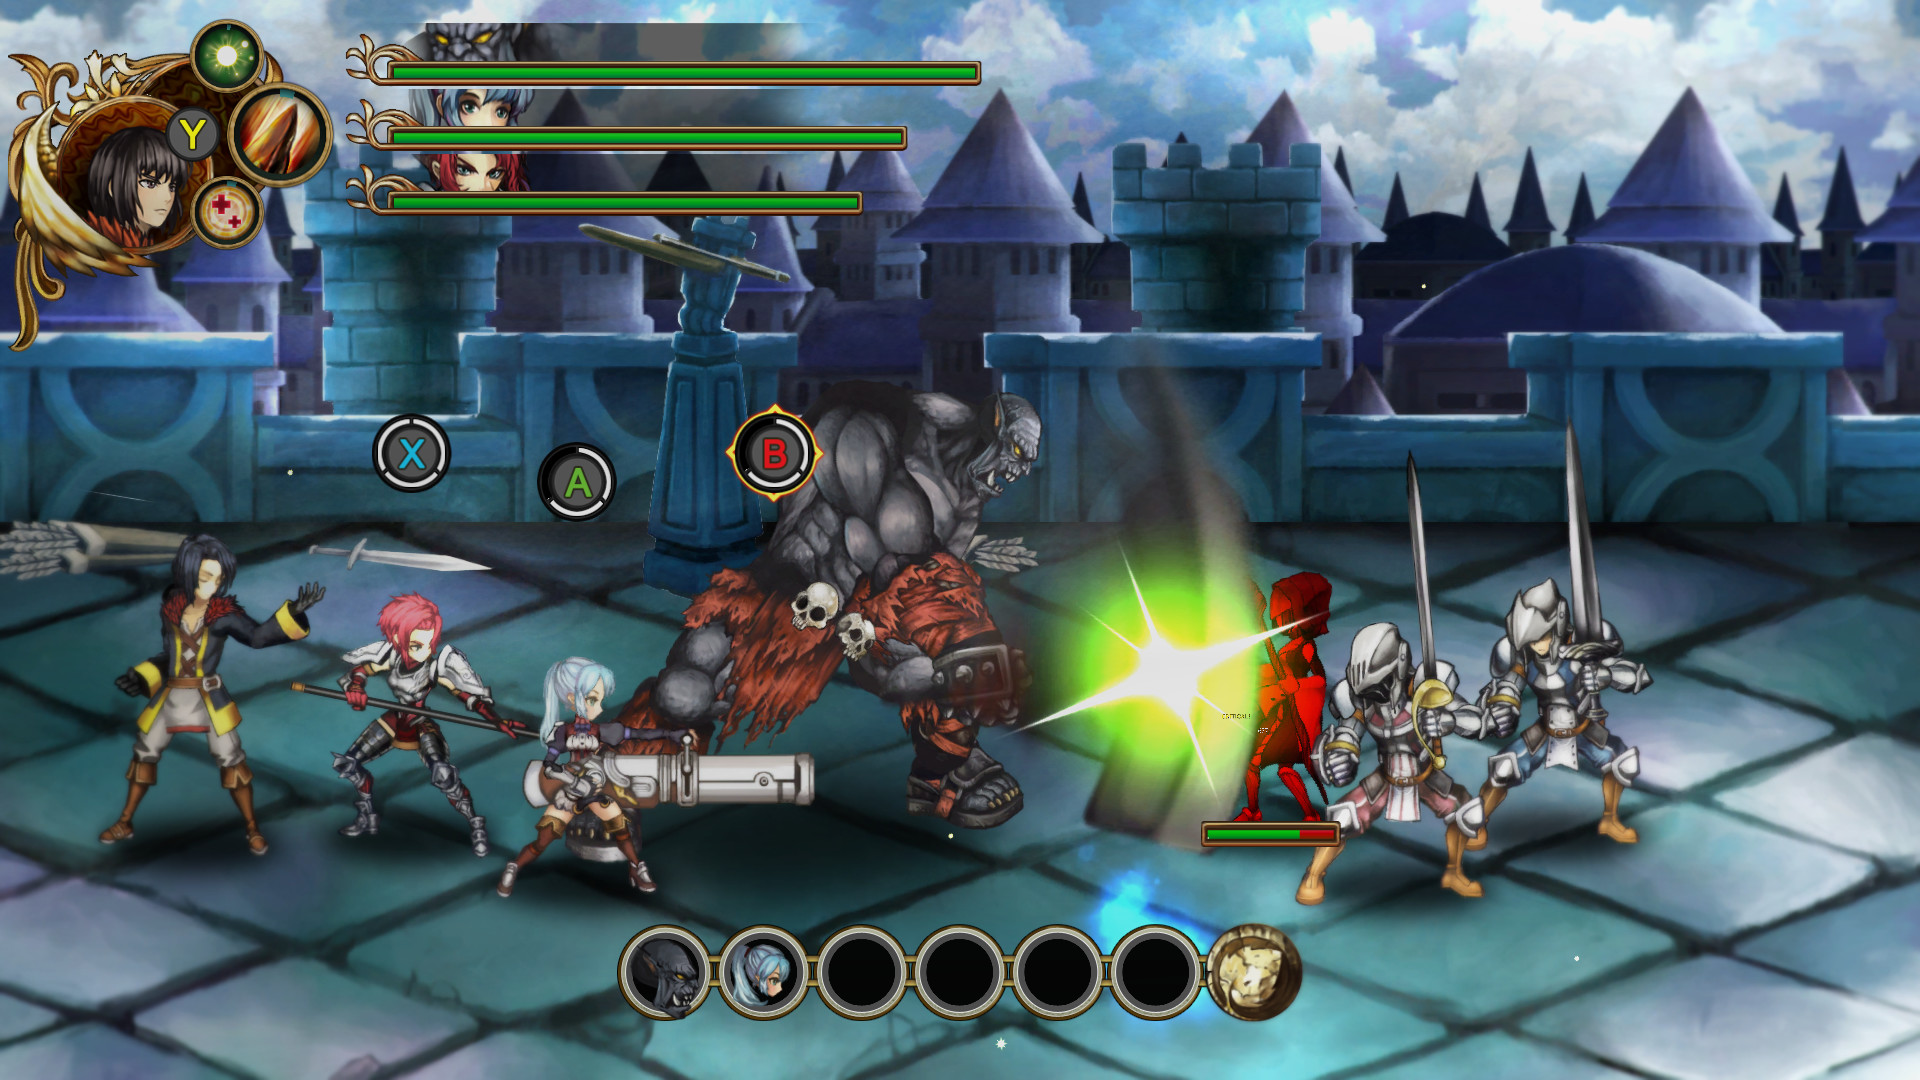 Fallen Legion: Rise to Glory download the new for ios